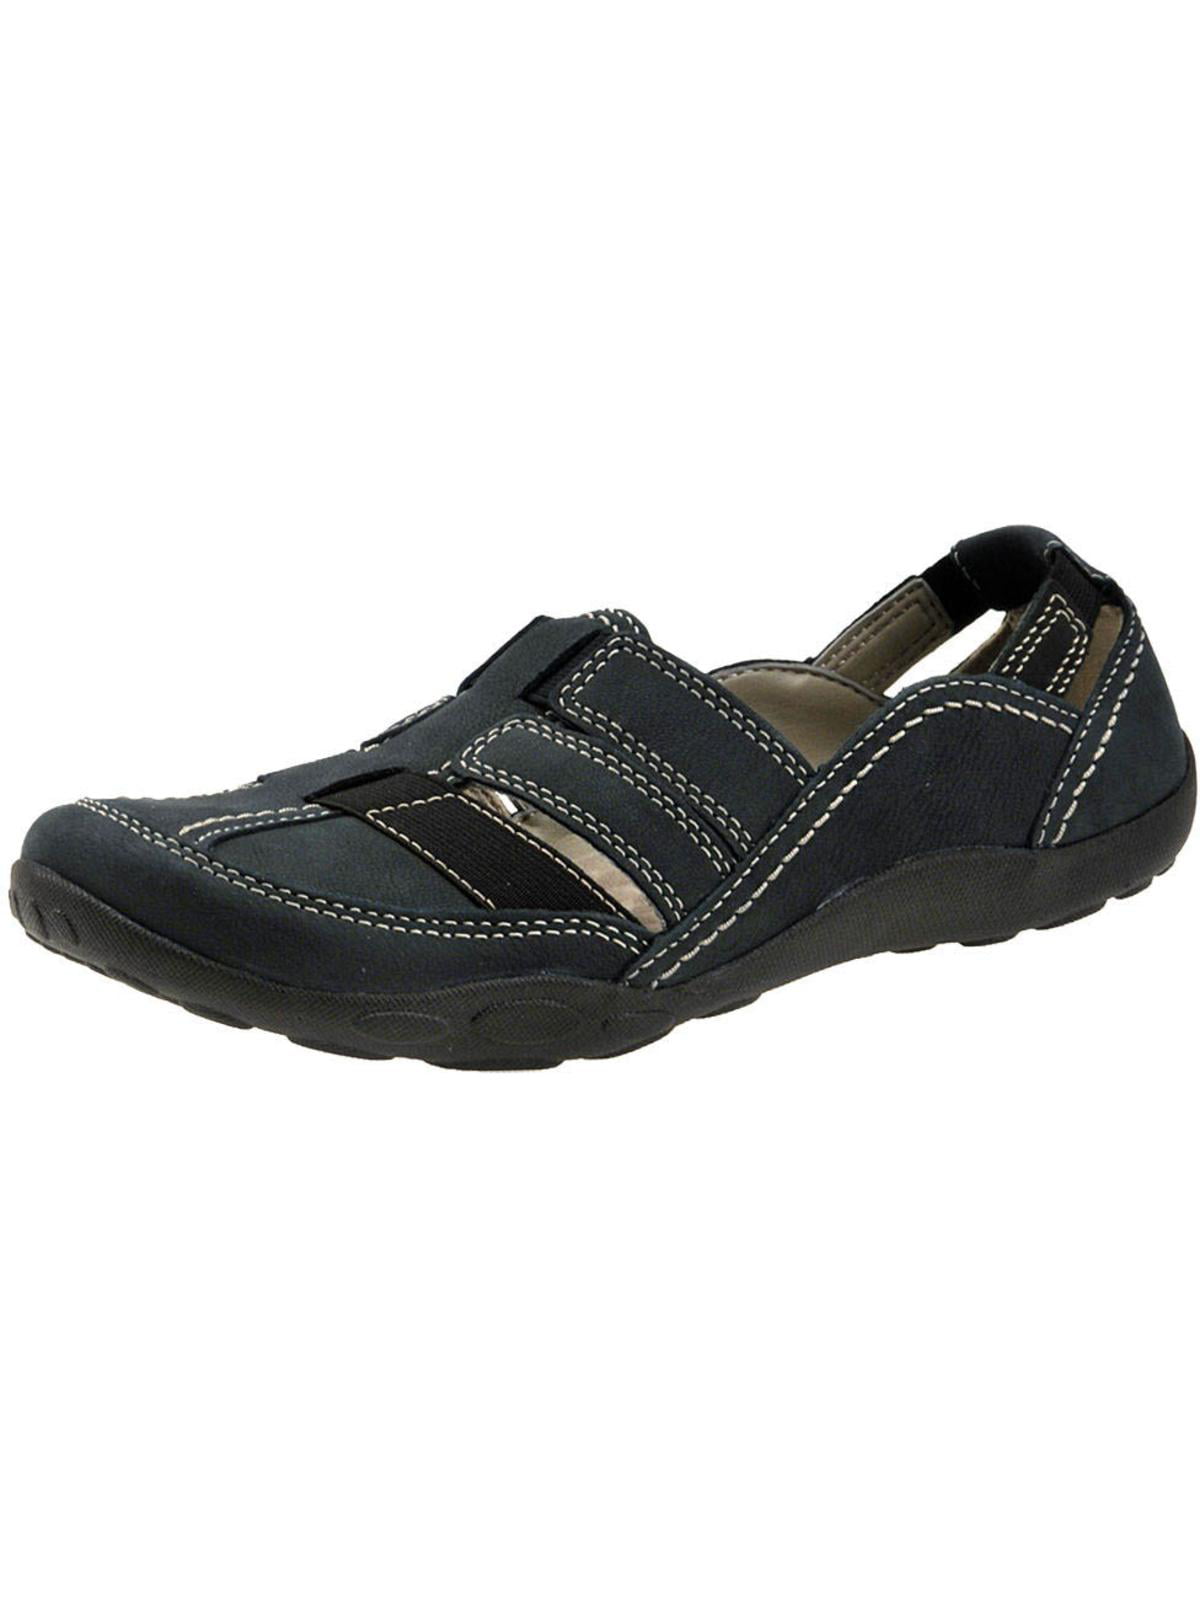 Ladies Clarks Casual Flat Shoes *Autumn Stone*